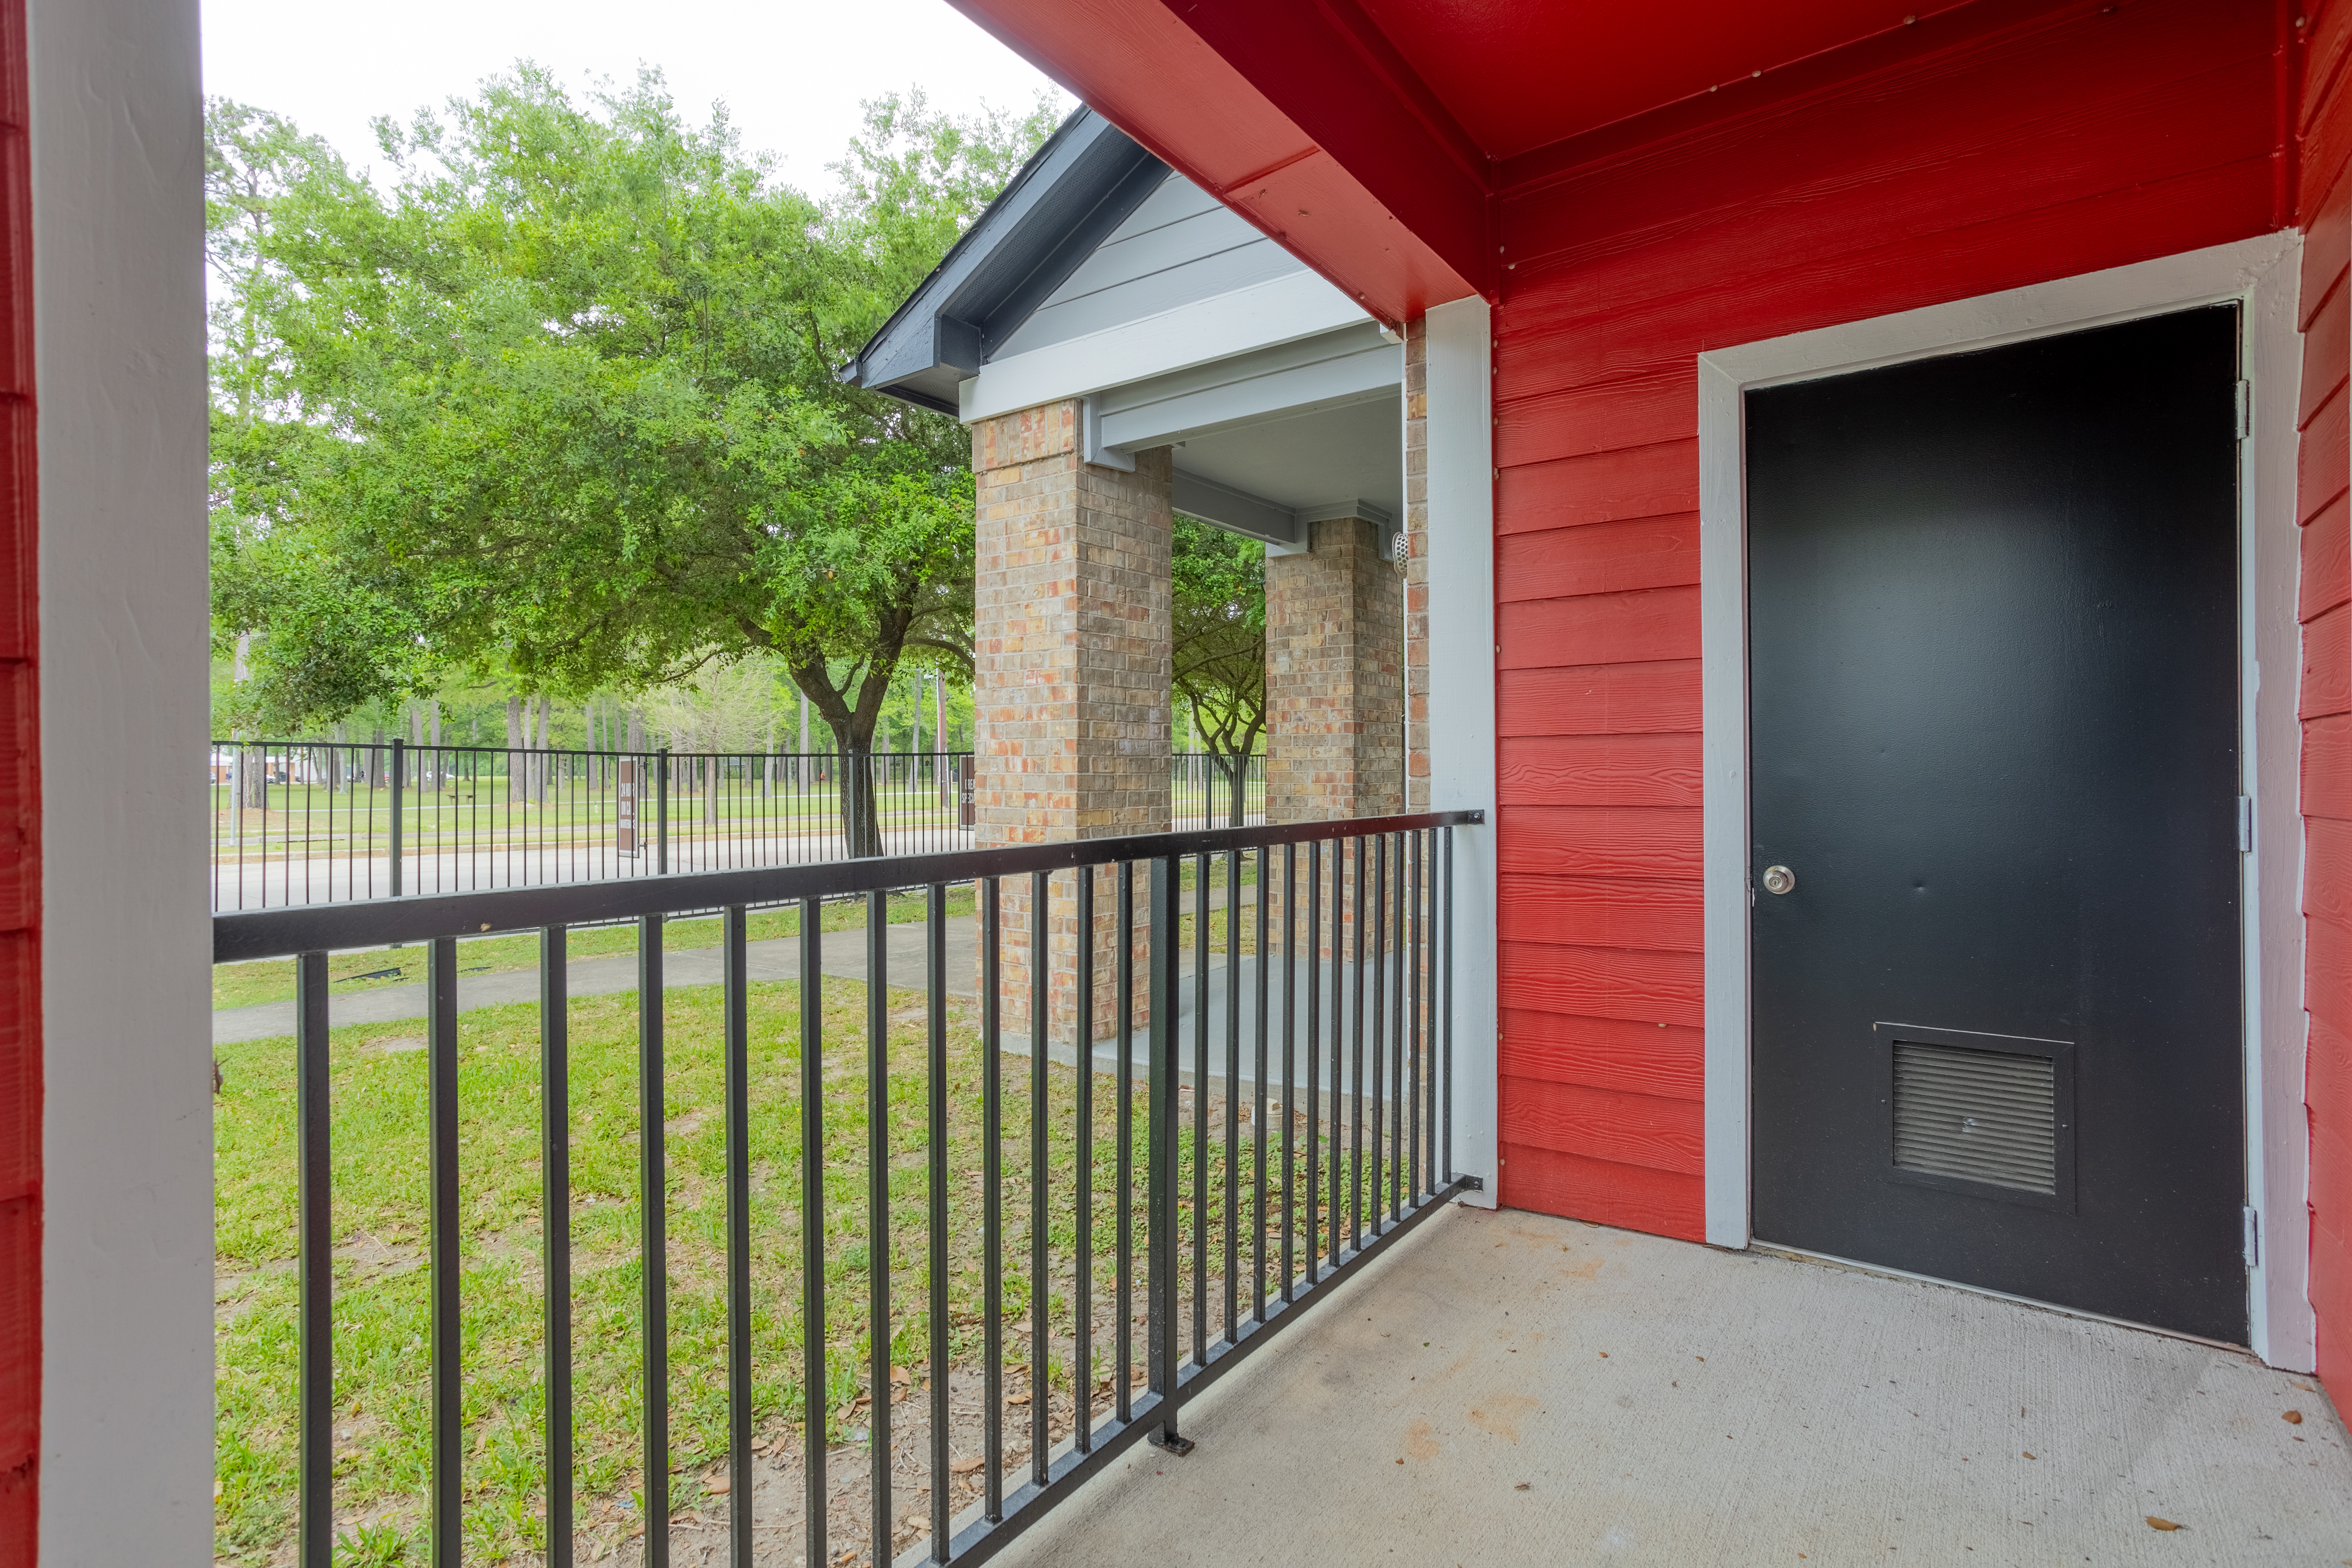 North Forest Trails Apts Houston 1 bedroom apartment patio with storage